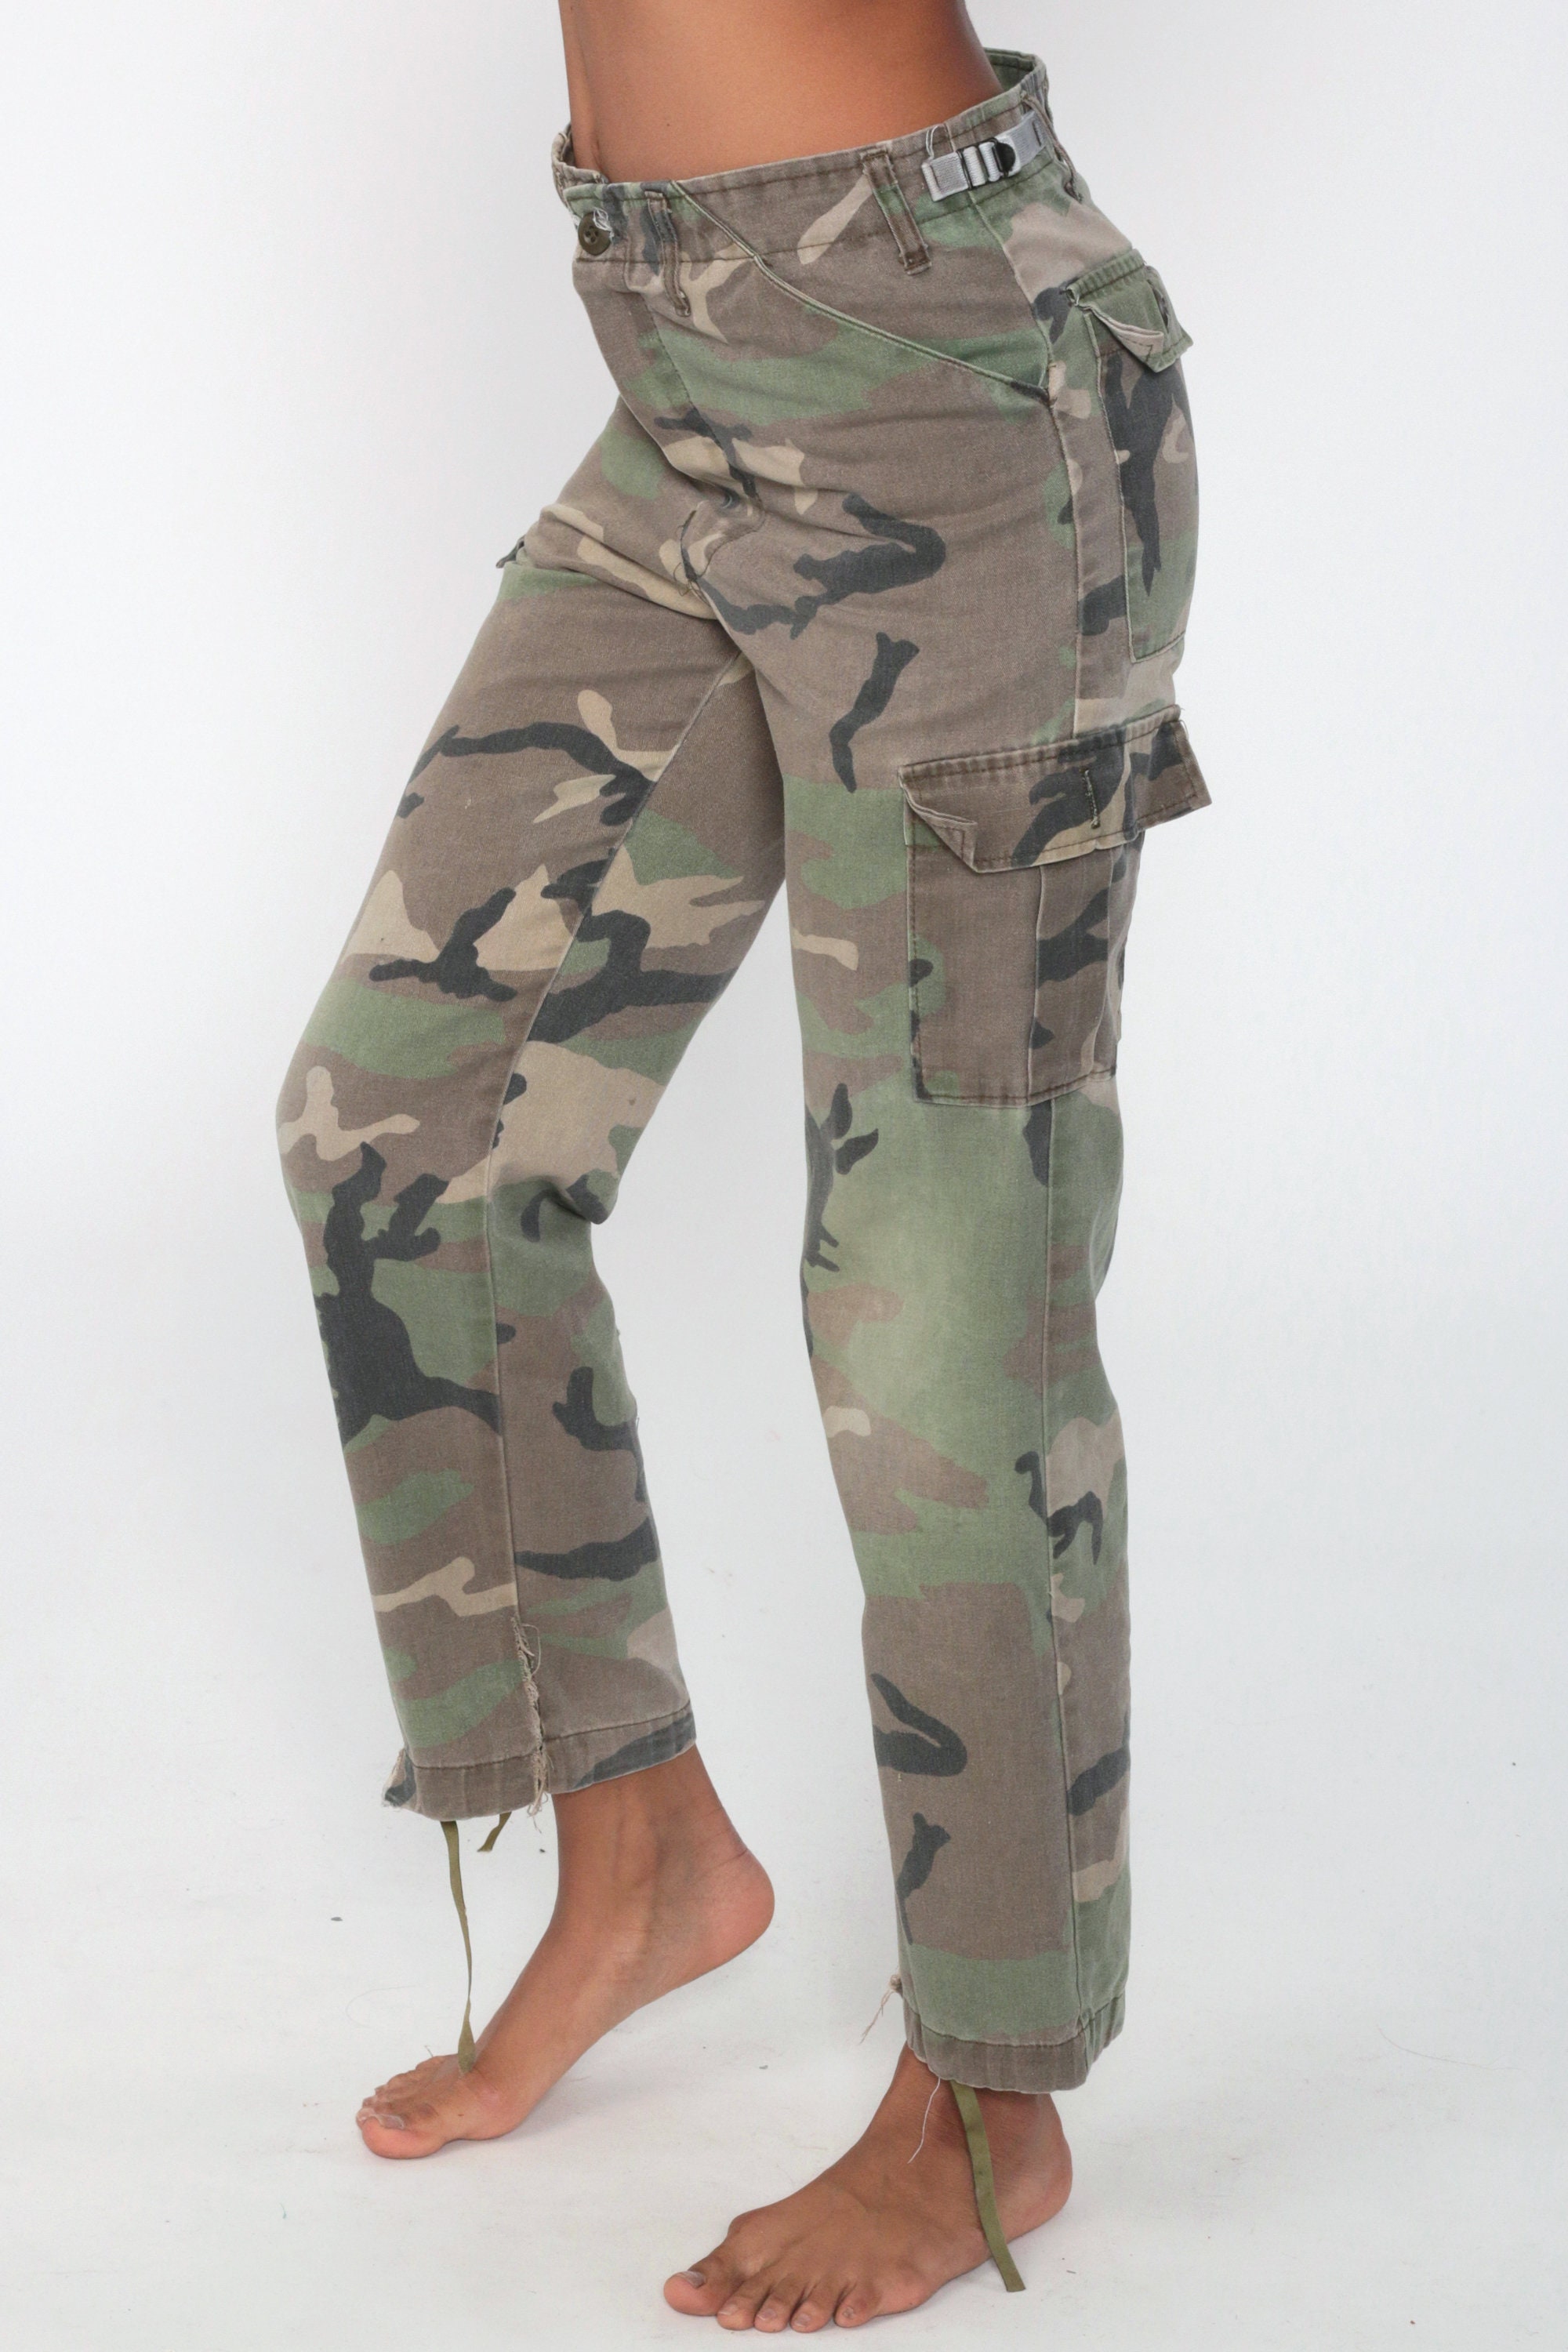 Camo Army Pants CARGO Pants 80s Military High Waisted Combat Olive ...